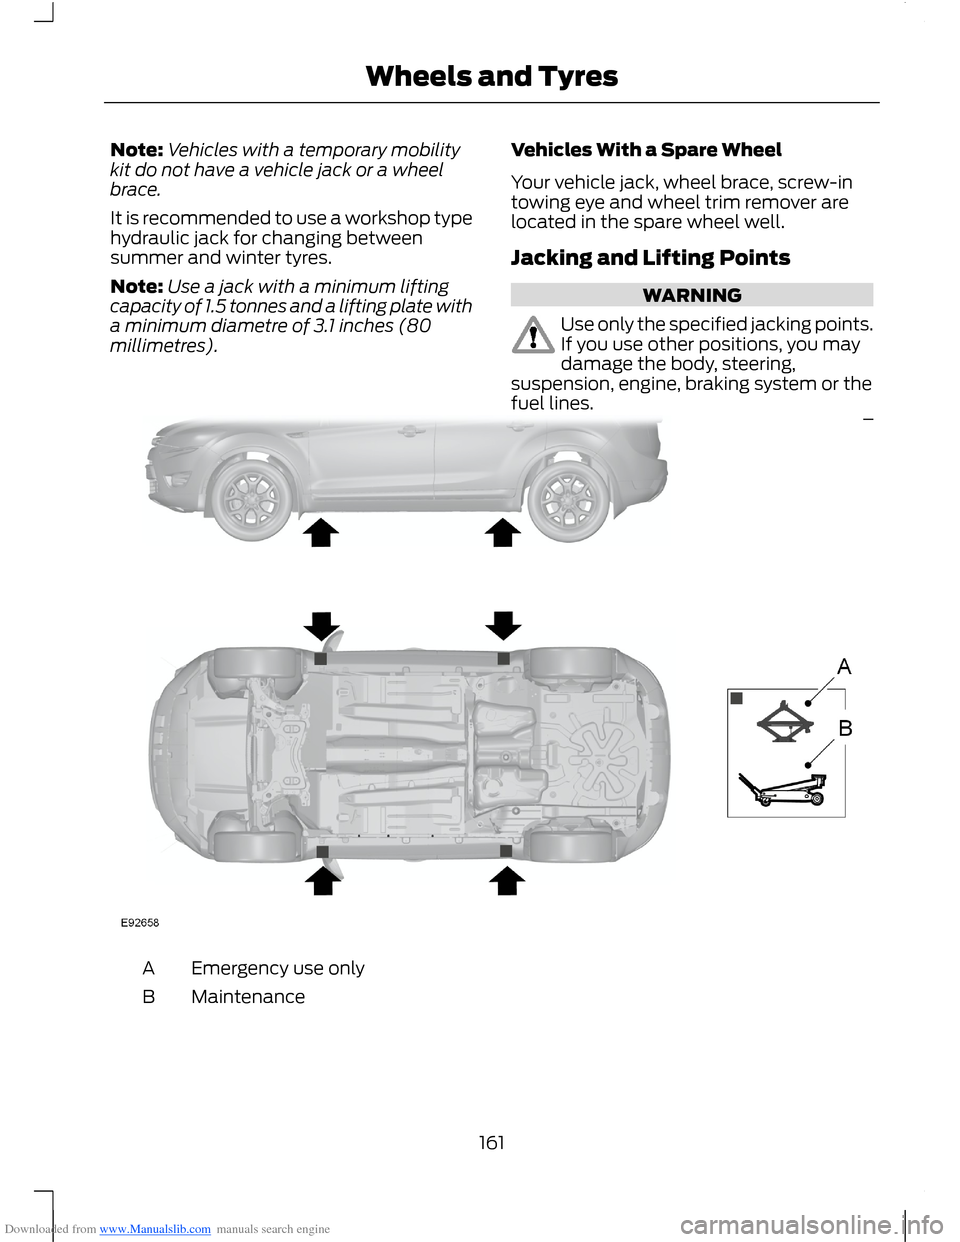 FORD B MAX 2012 1.G Owners Manual Downloaded from www.Manualslib.com manuals search engine Note:Vehicles with a temporary mobilitykit do not have a vehicle jack or a wheelbrace.
It is recommended to use a workshop typehydraulic jack f